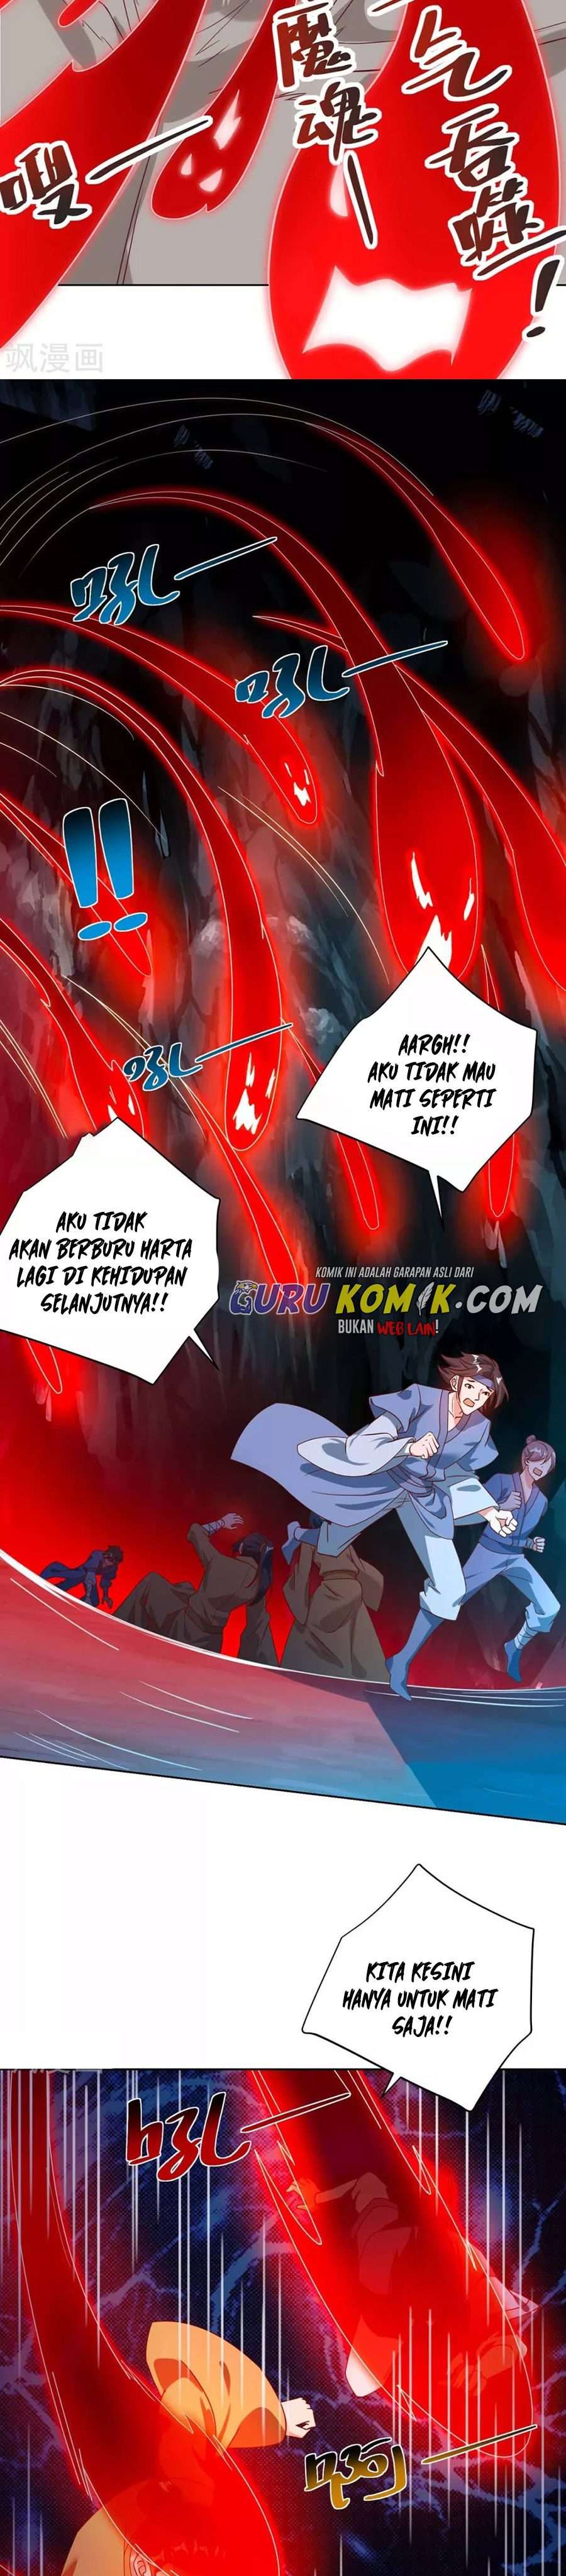 Rebirth After 80.000 Years Passed Chapter 189